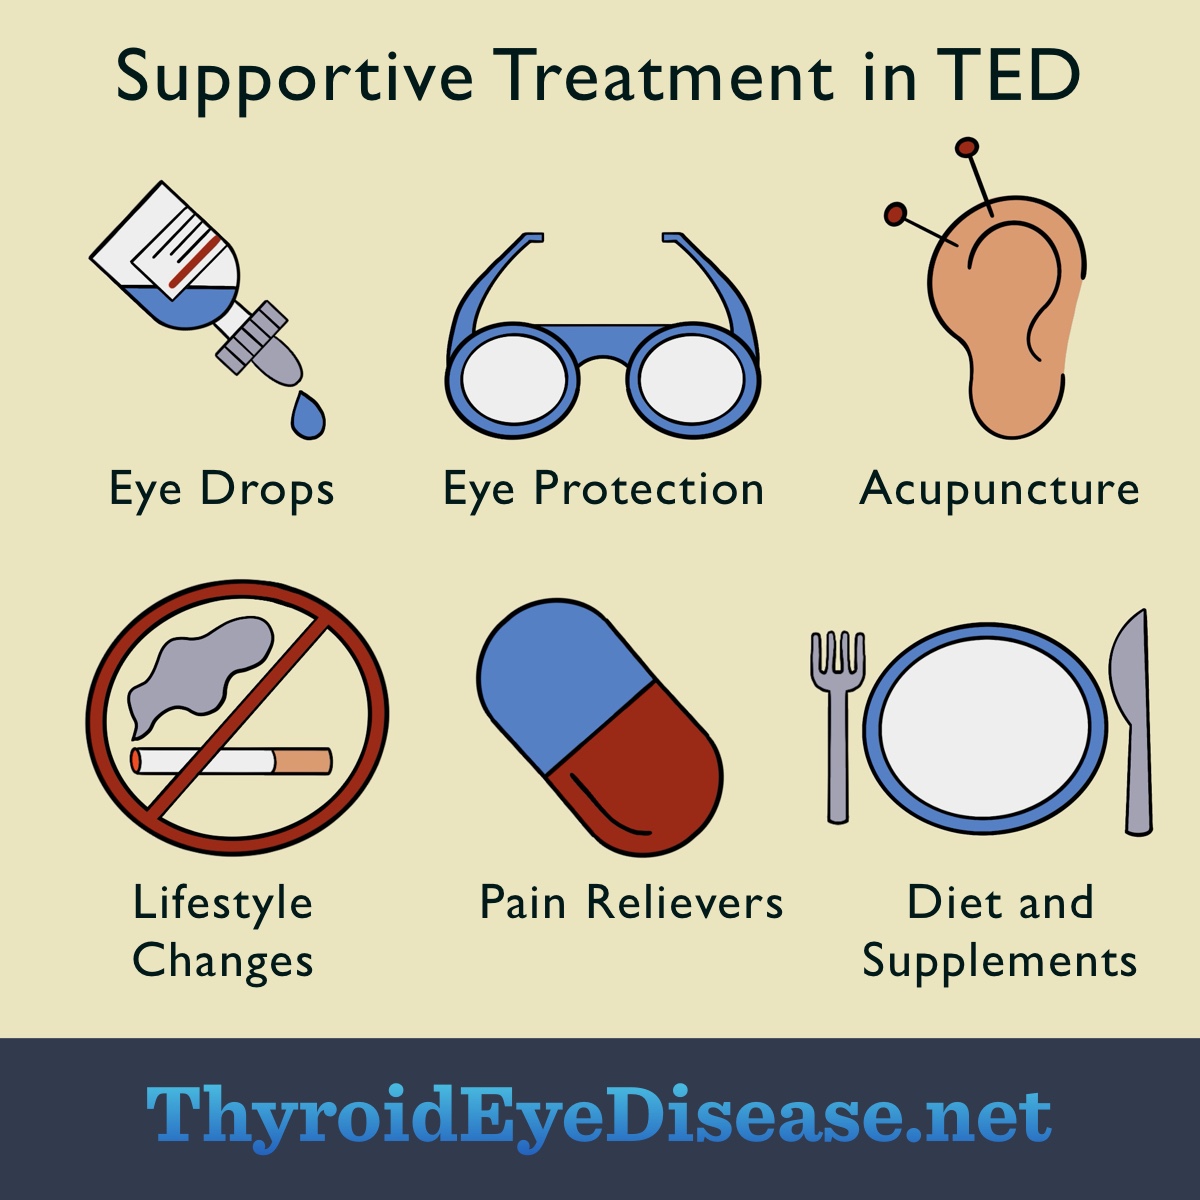 Supportive treatment in TED: Eye drops, eye protection, acupuncture, stopping smoking, pain relief, and diet.